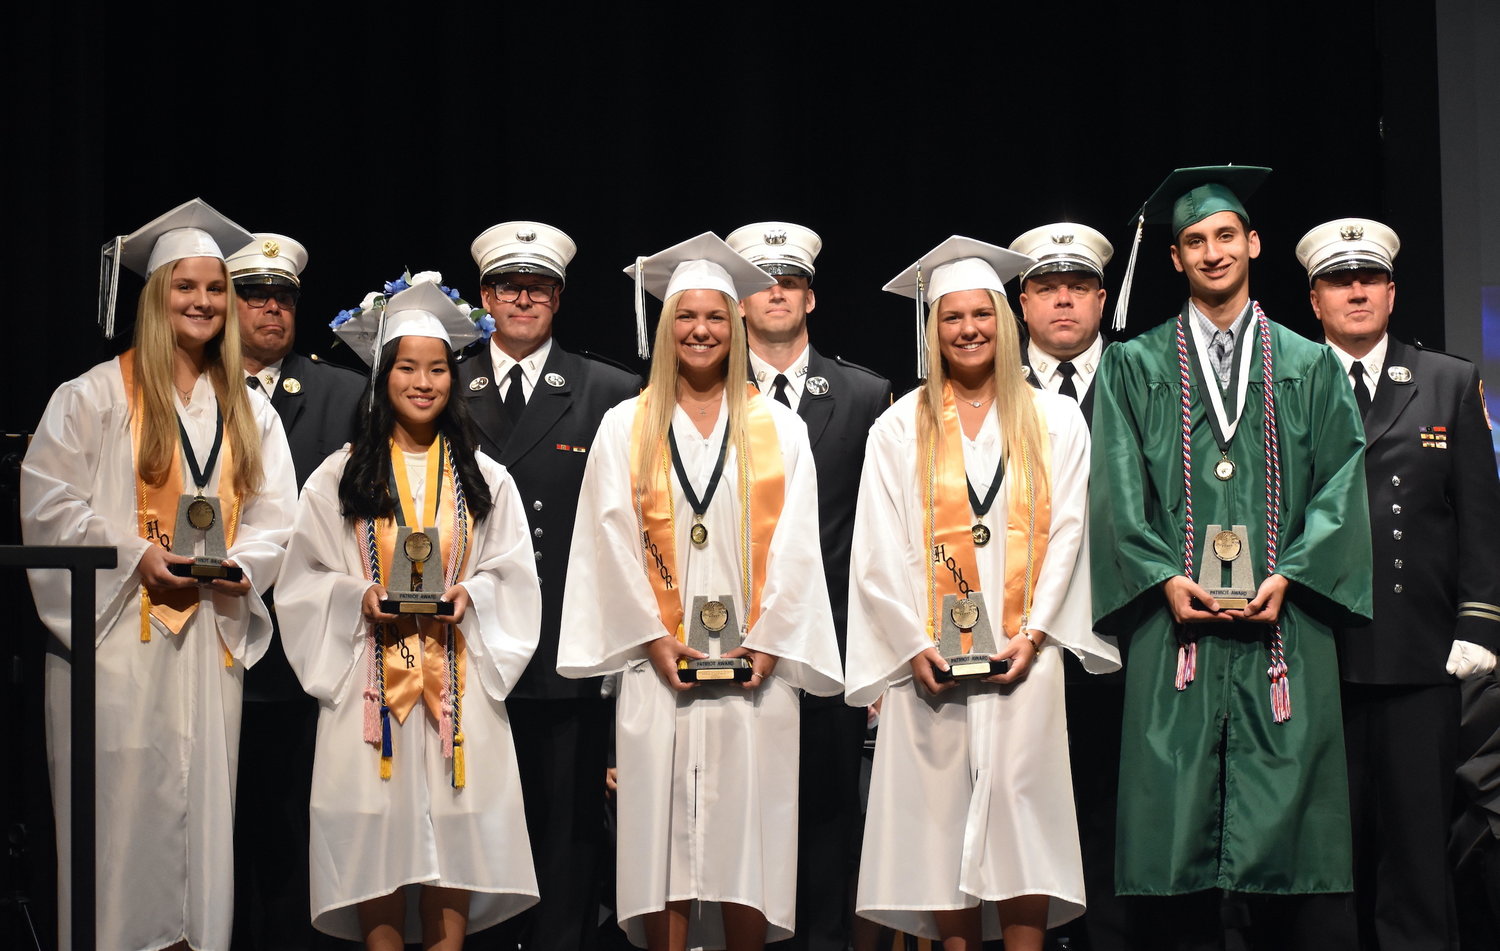 Seaford High School’s 2022 Patriot Award recipients were, from left, Alexandra Leggio, Annarose Romanelli, Brooke Surace, Parker Surace and Bryant Wong. An FDNY honor guard joined them after they received their awards at graduation on June 25.